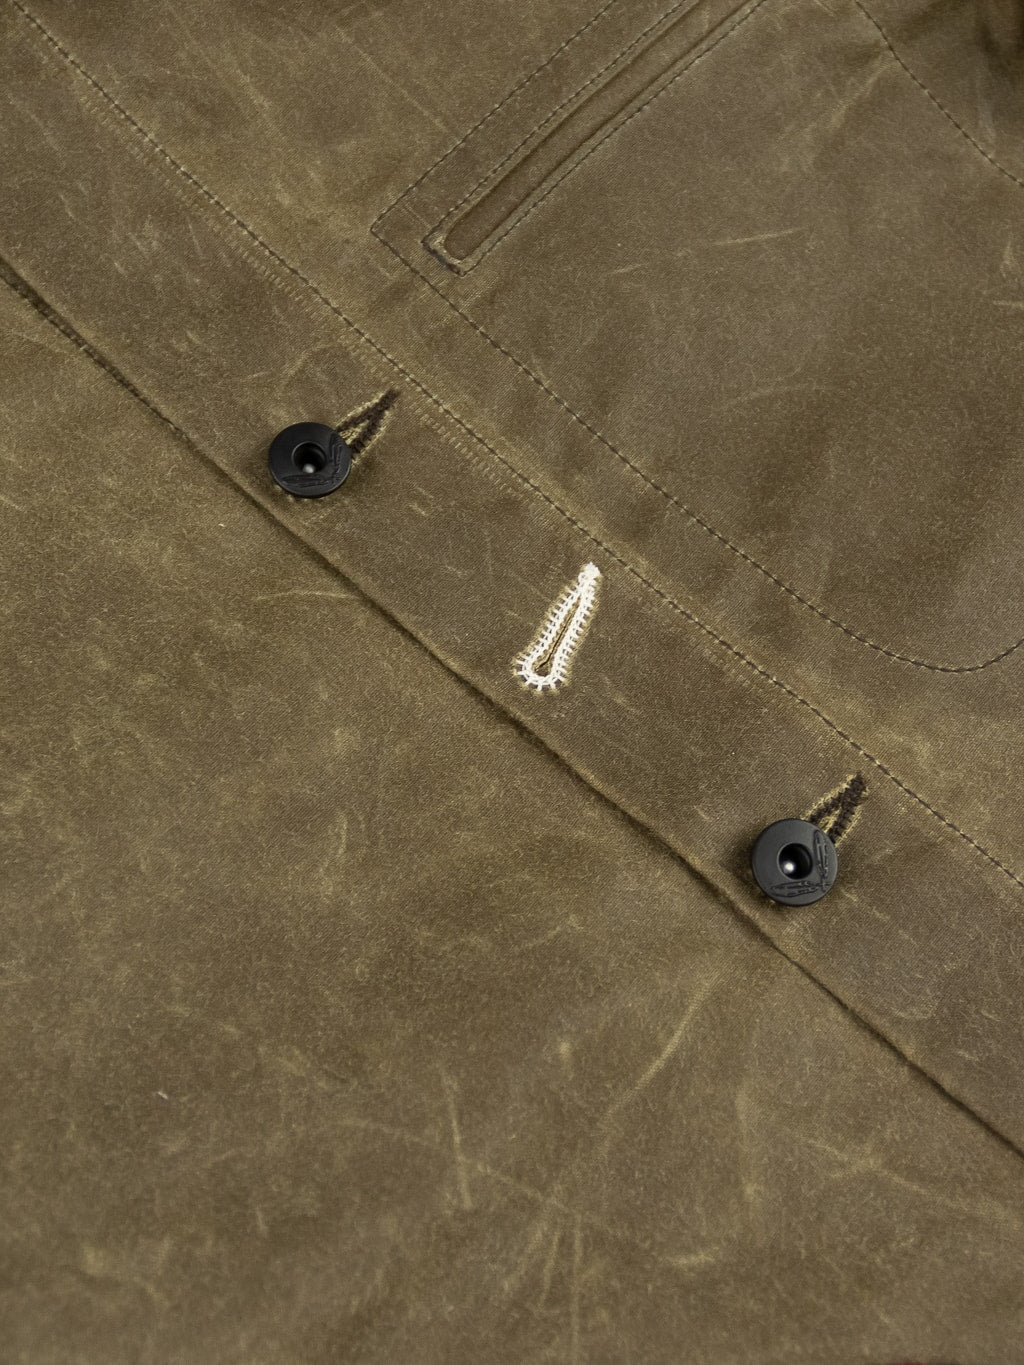 Rogue Territory Supply Jacket Lined Brown Ridgeline branded nickel buttons